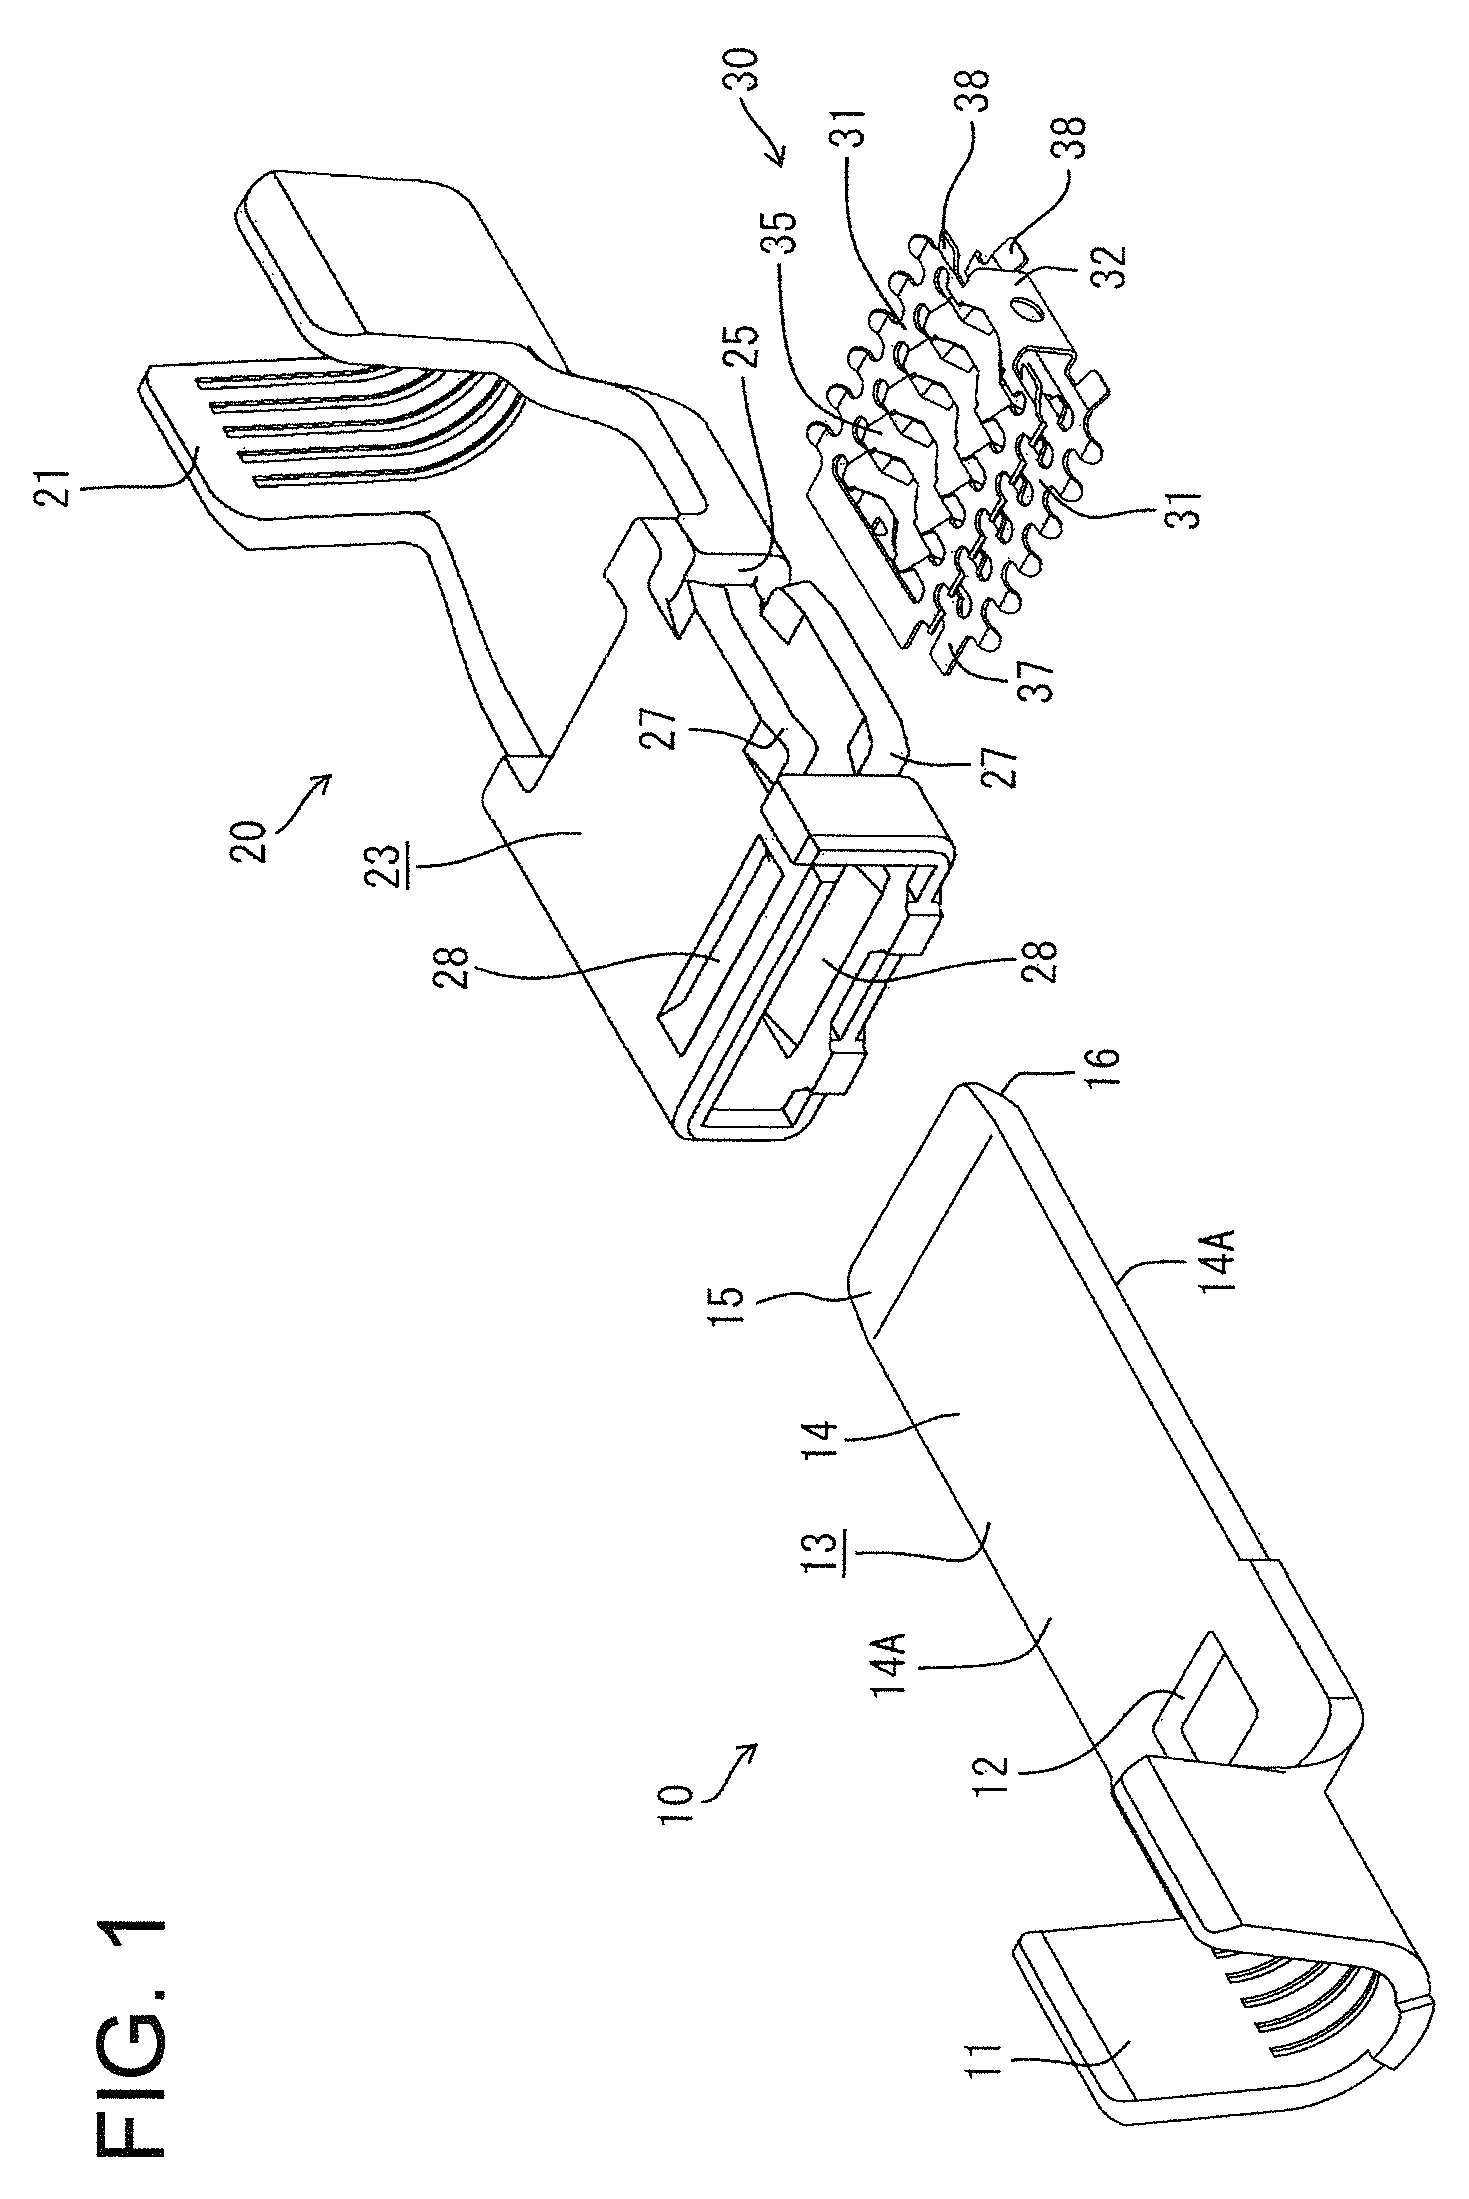 Terminal fitting connecting structure